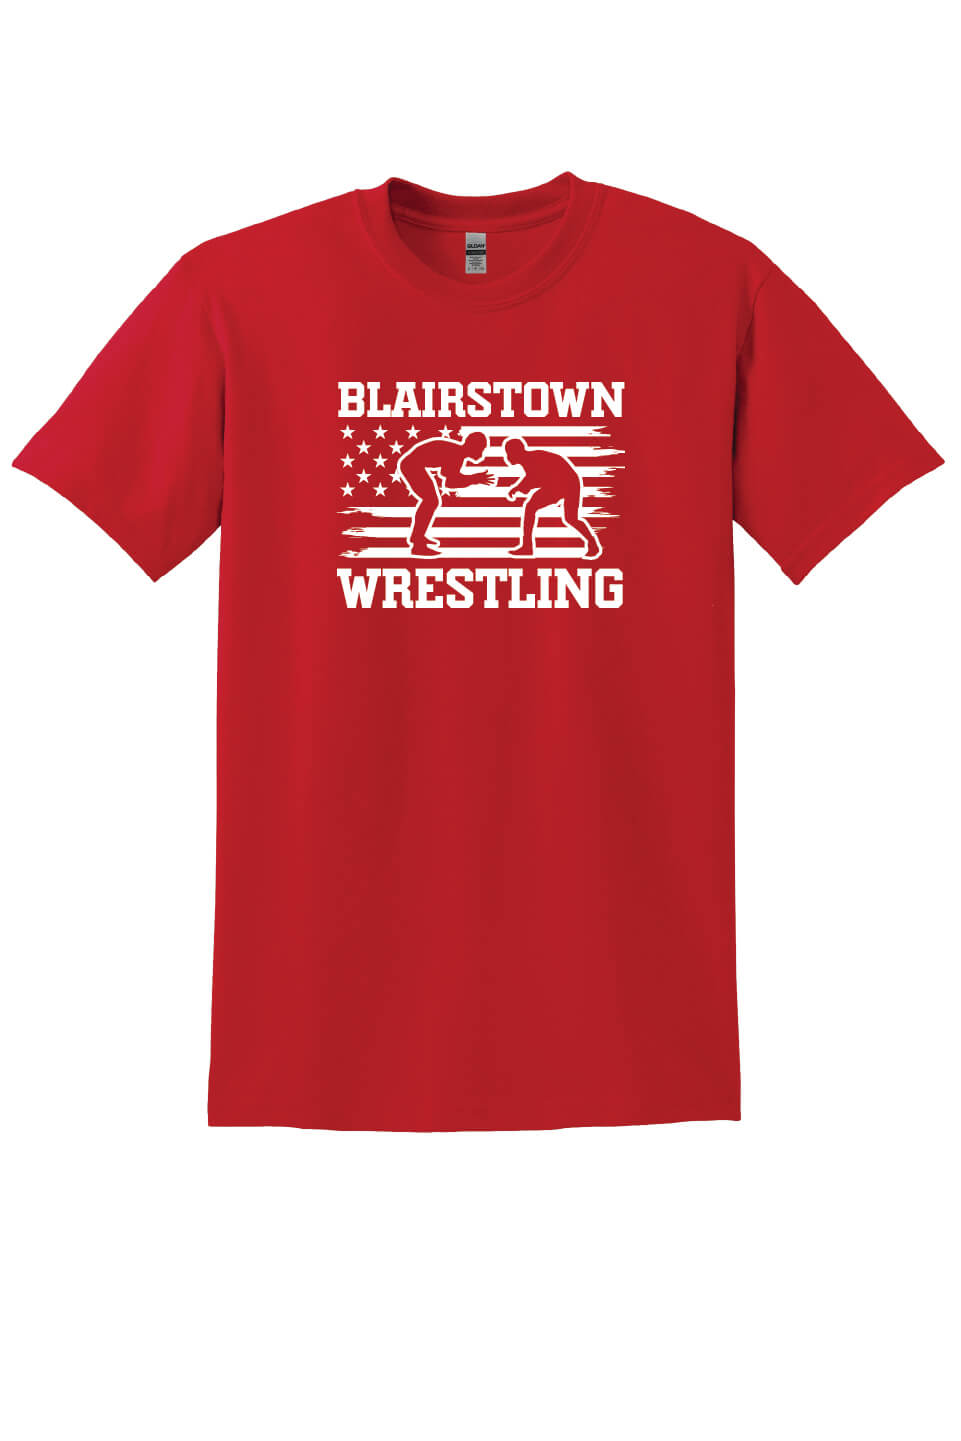 Blairstown Wrestling Flag Short Sleeve T-Shirt (Youth) red